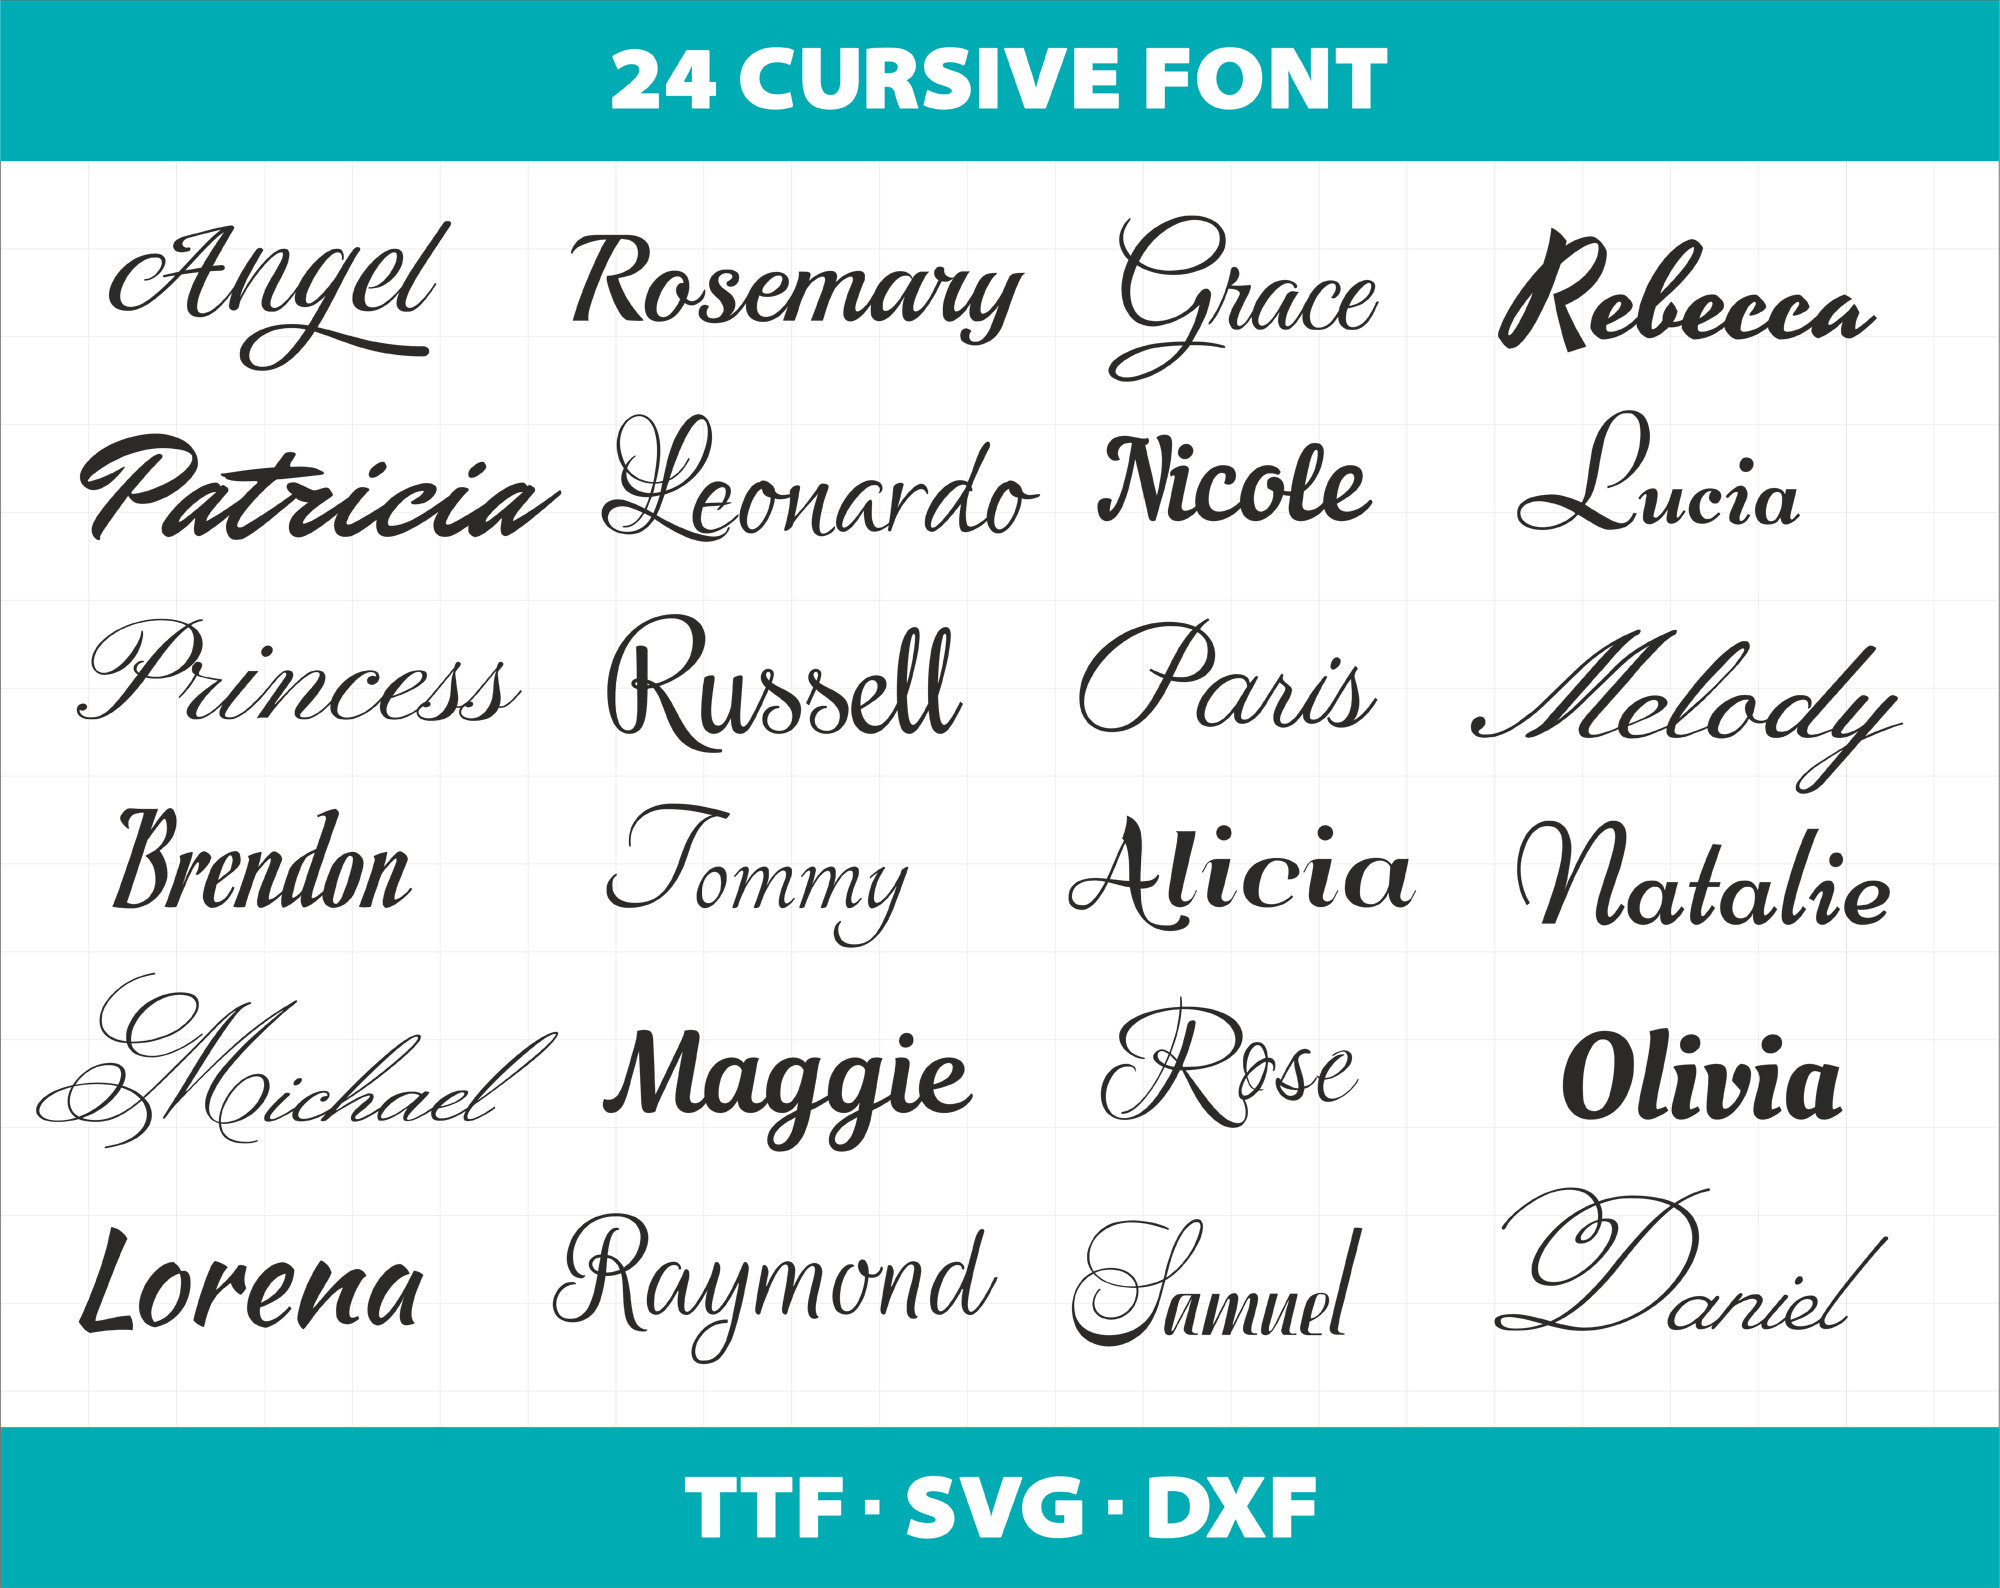 Cursive Fonts In Word | lupon.gov.ph